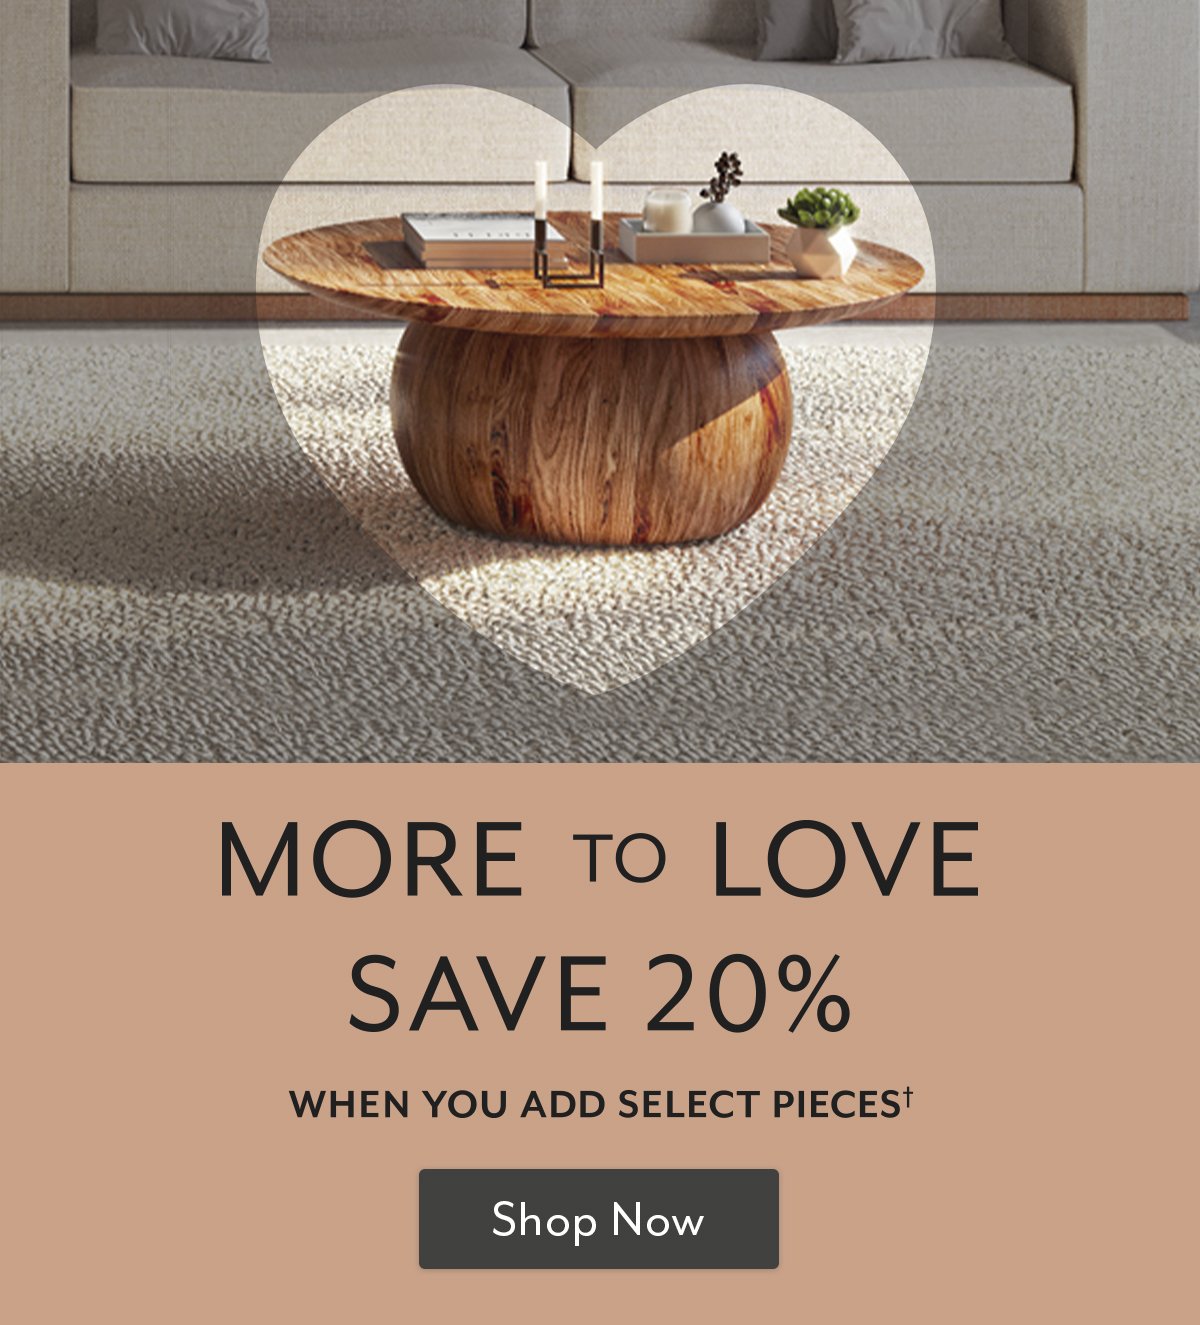 Save 20% when you add select pieces